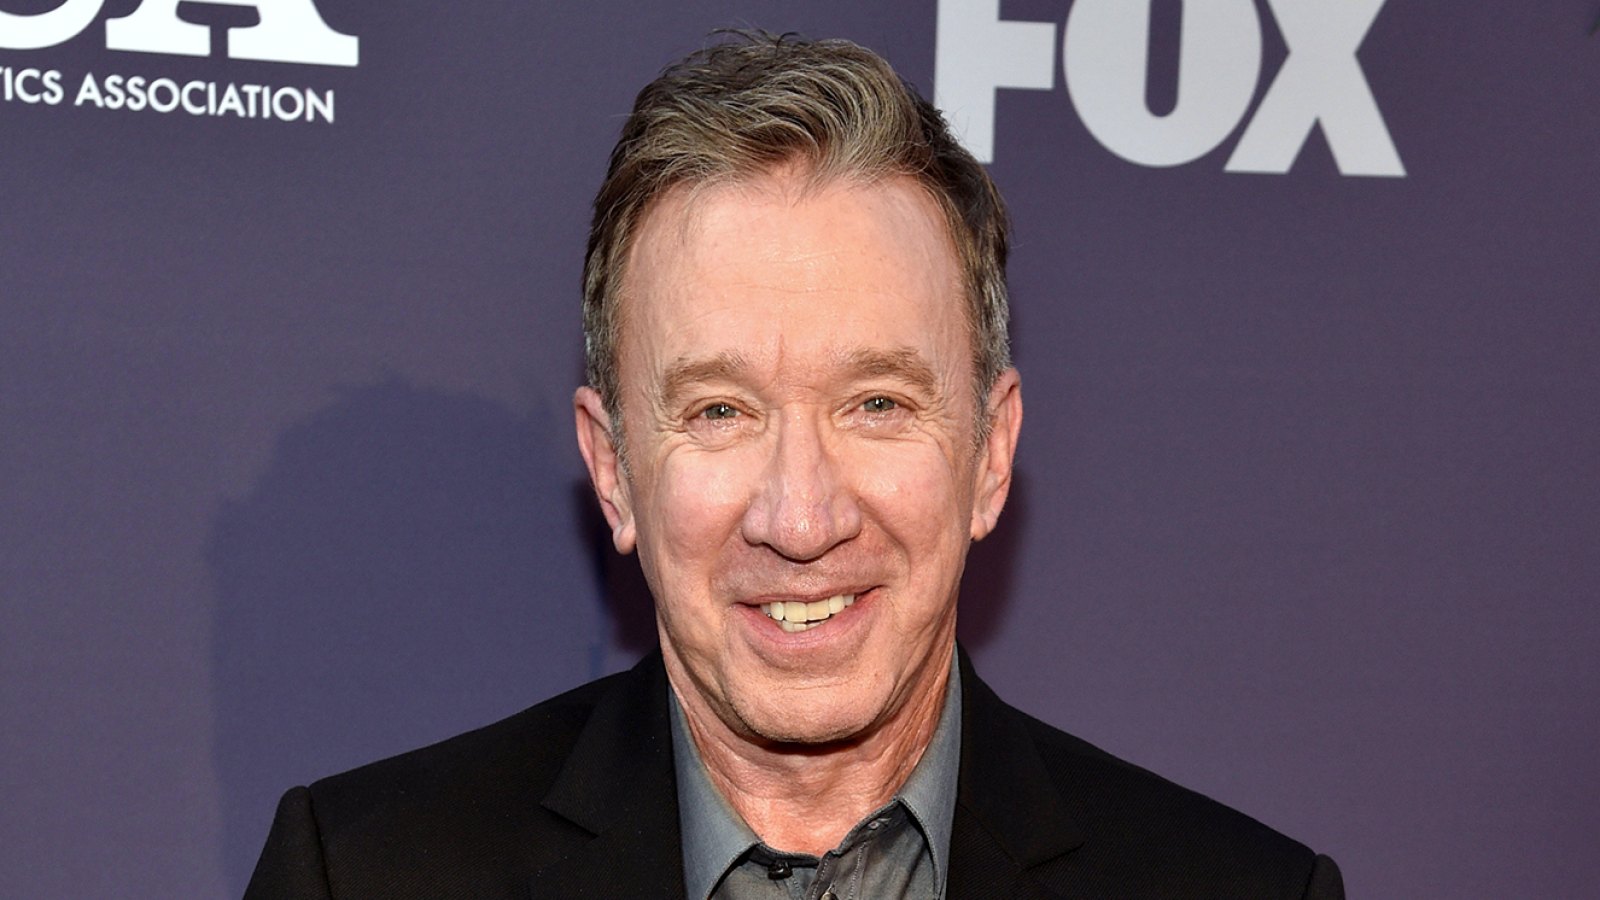 Tim Allen Reveals How He’s Stayed Sober for 22 Years